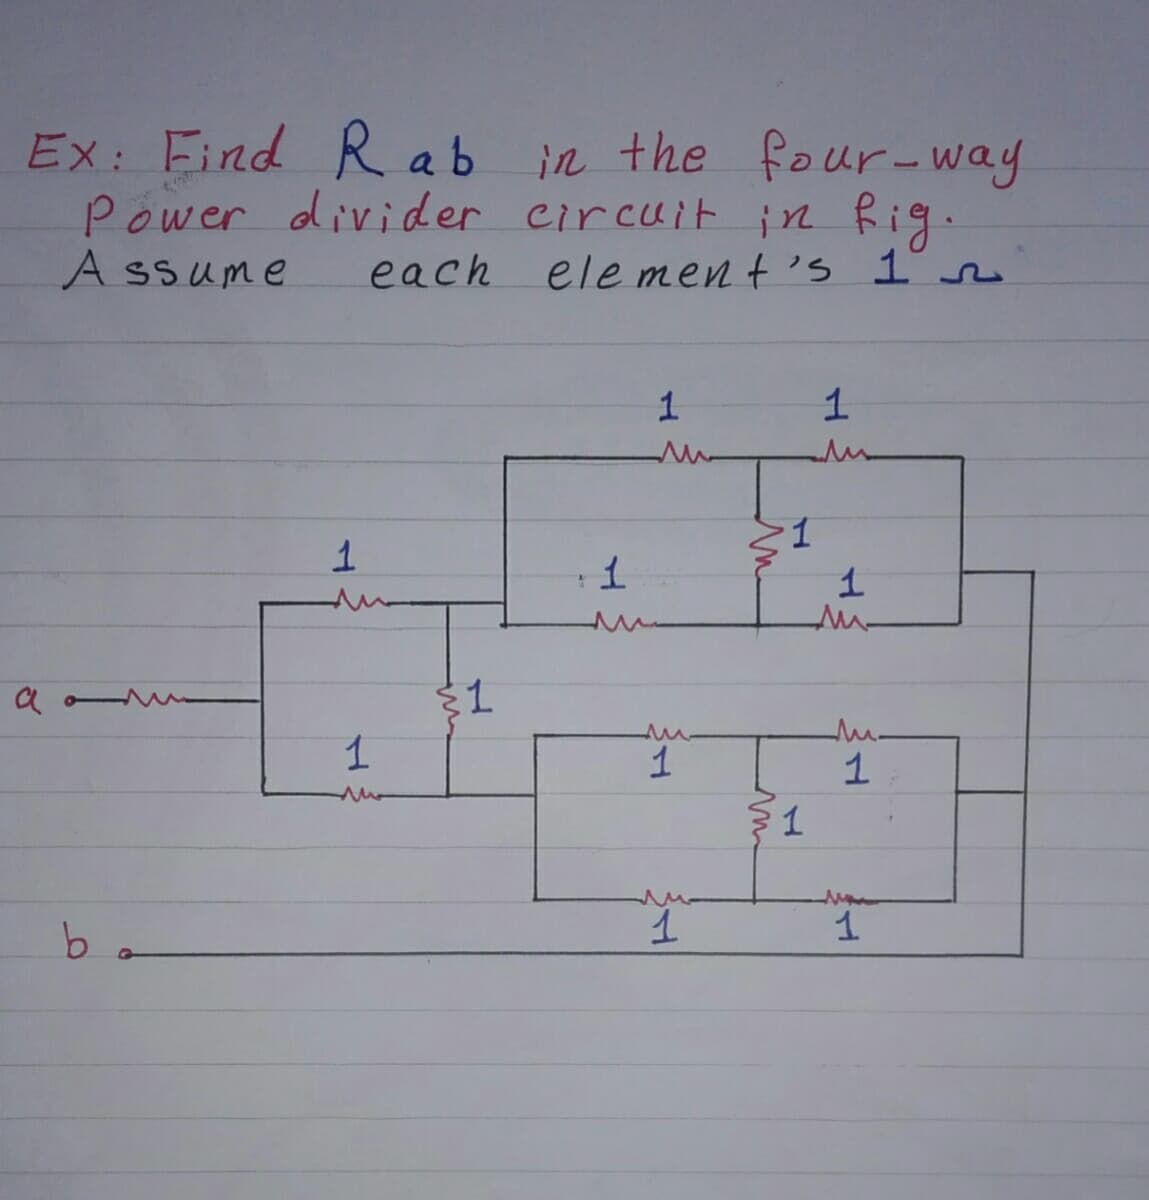 Ex: Find Rab
in the four-way
Power divider circuit in fig.
Assume
each element's 12
1
1
1
a
ba
1
ли
1
1
1
1
1
§1
1
ли
ли
1
1